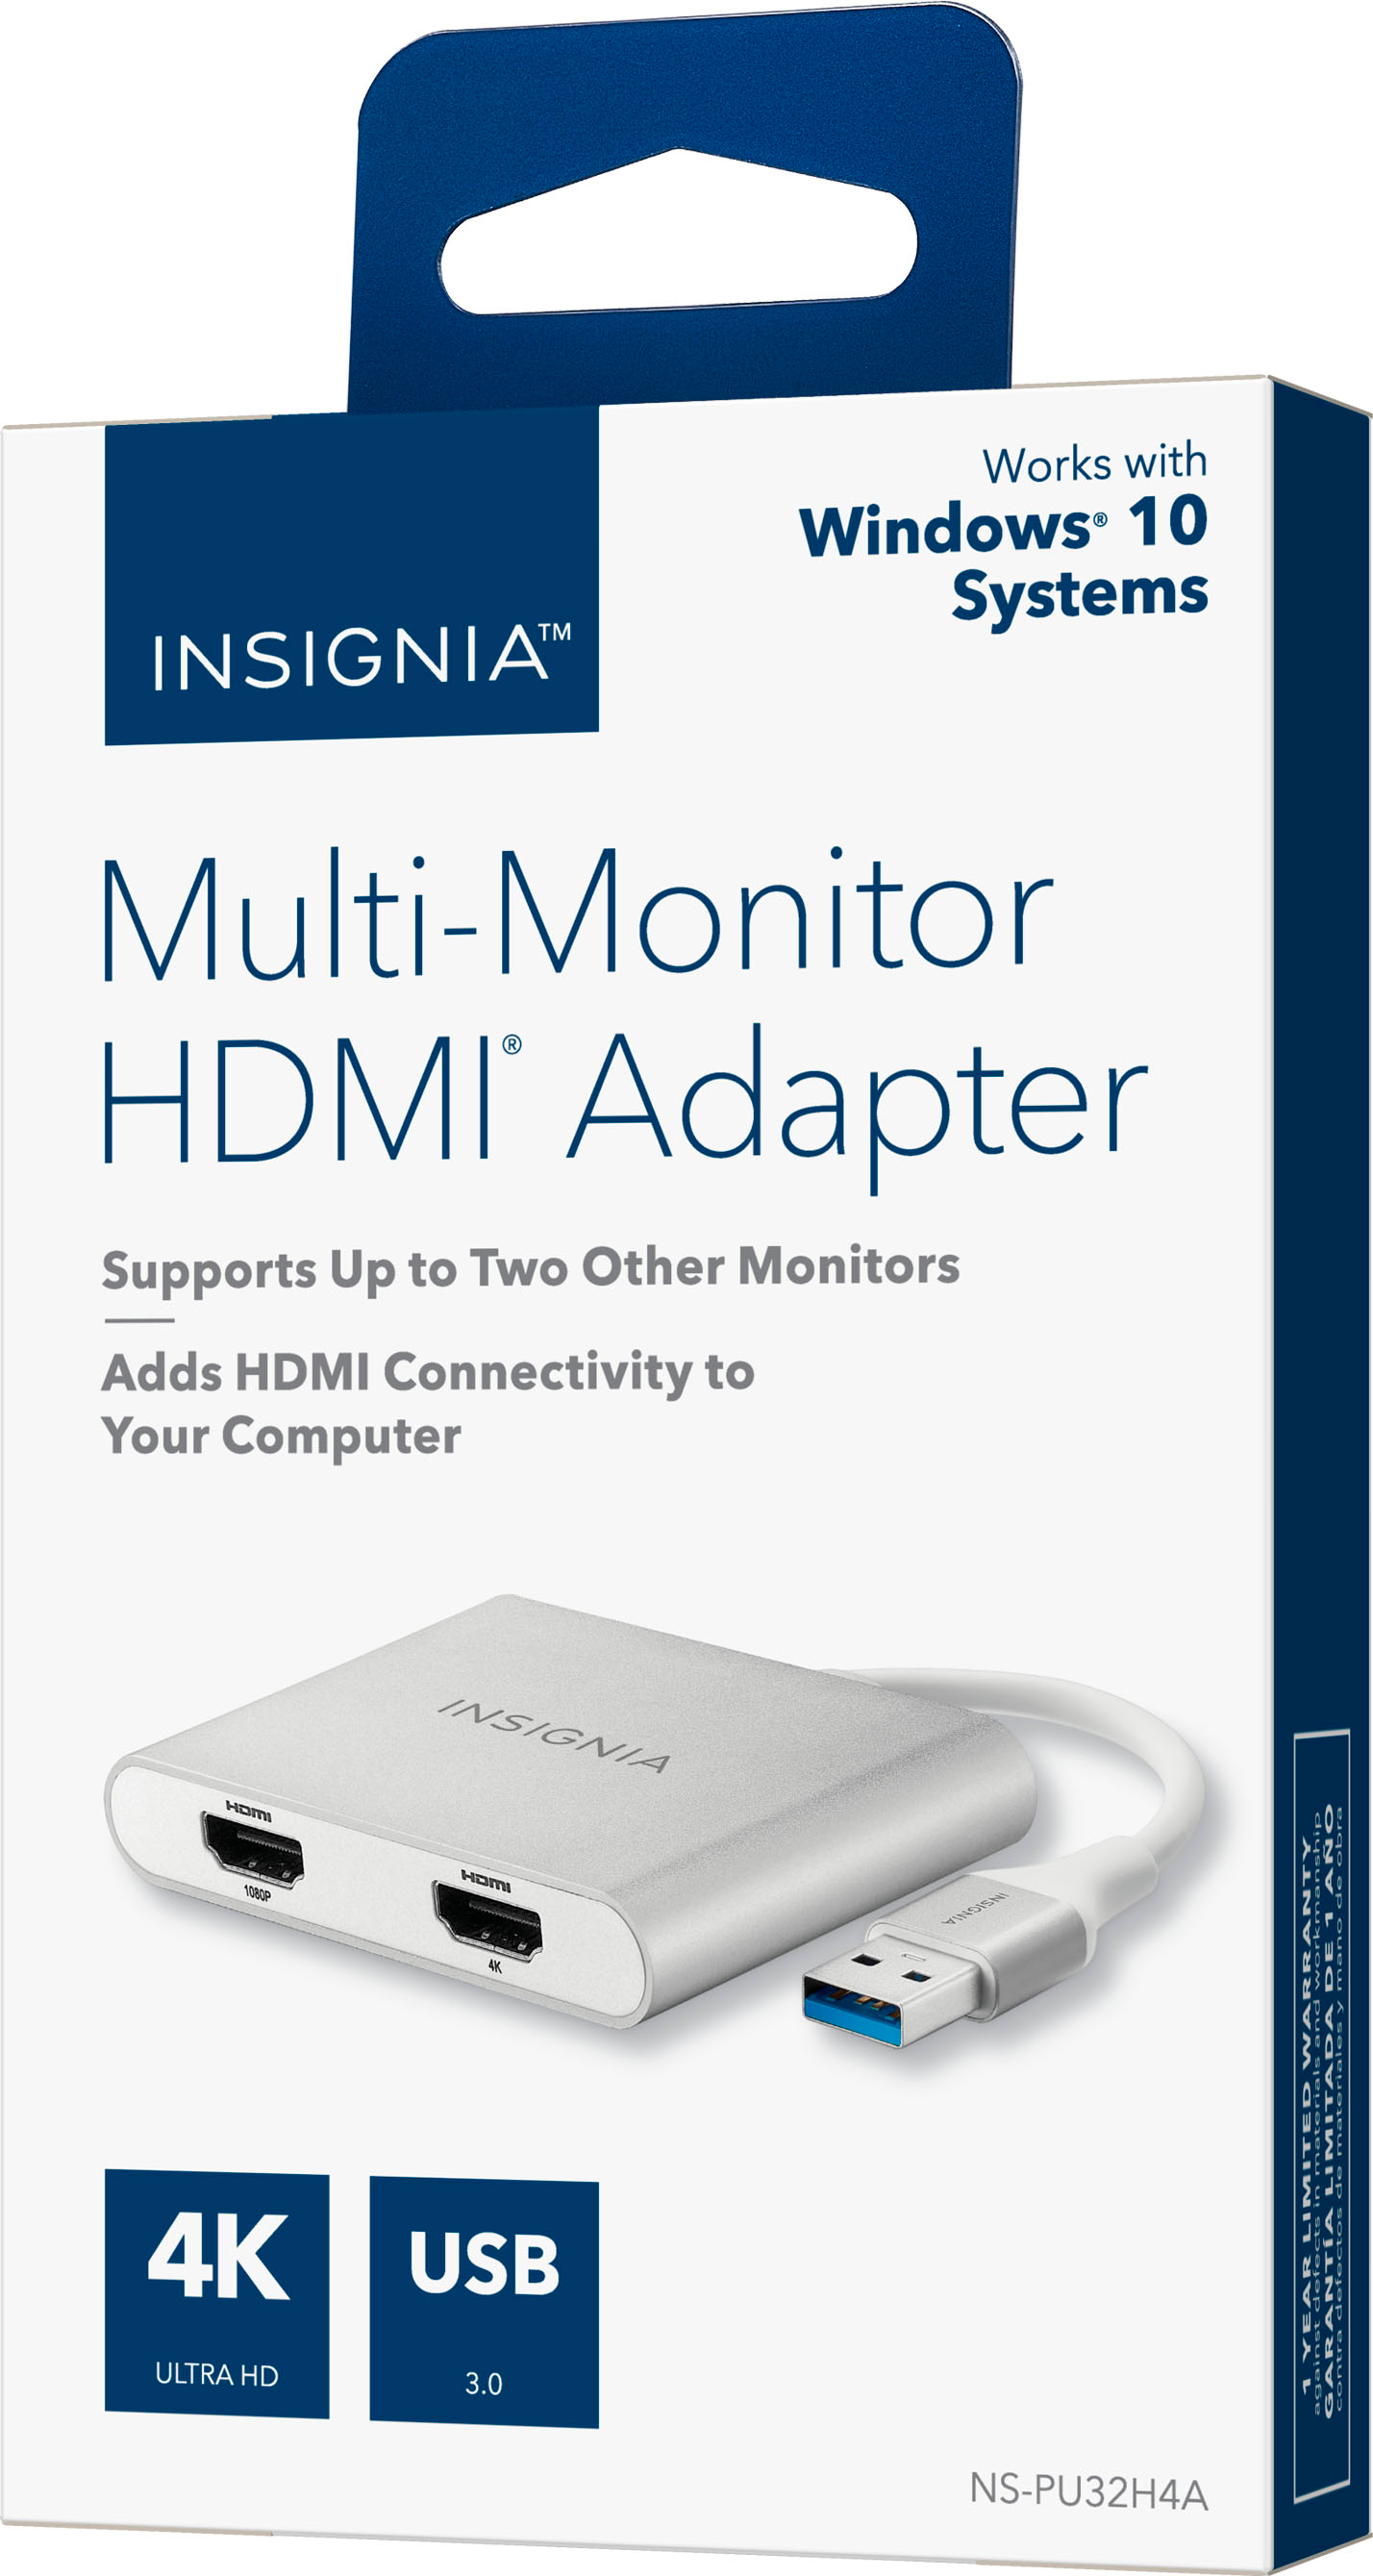 USB 3.0 to 4 HDMI Adapter - Quad Monitor - USB-A Display Adapters